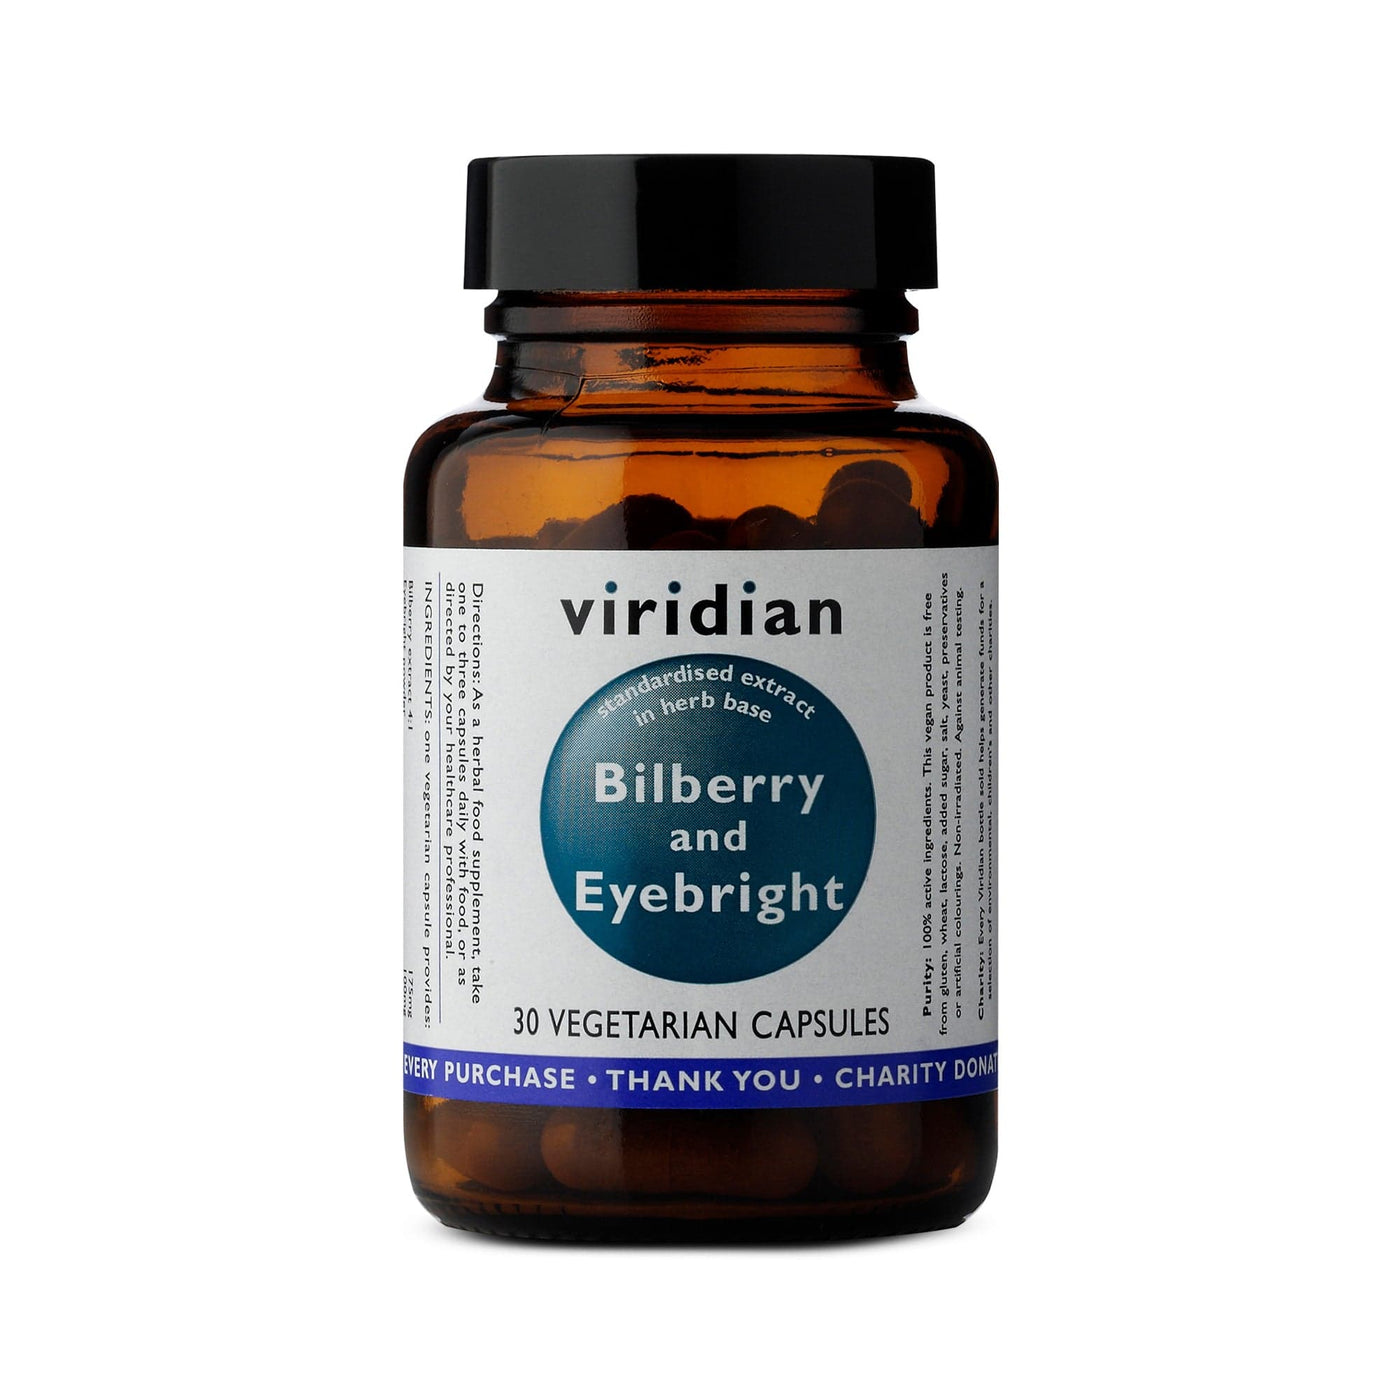 Neal's Yard Remedies Viridian Bilberry and Eyebright Extract - 30 Capsules